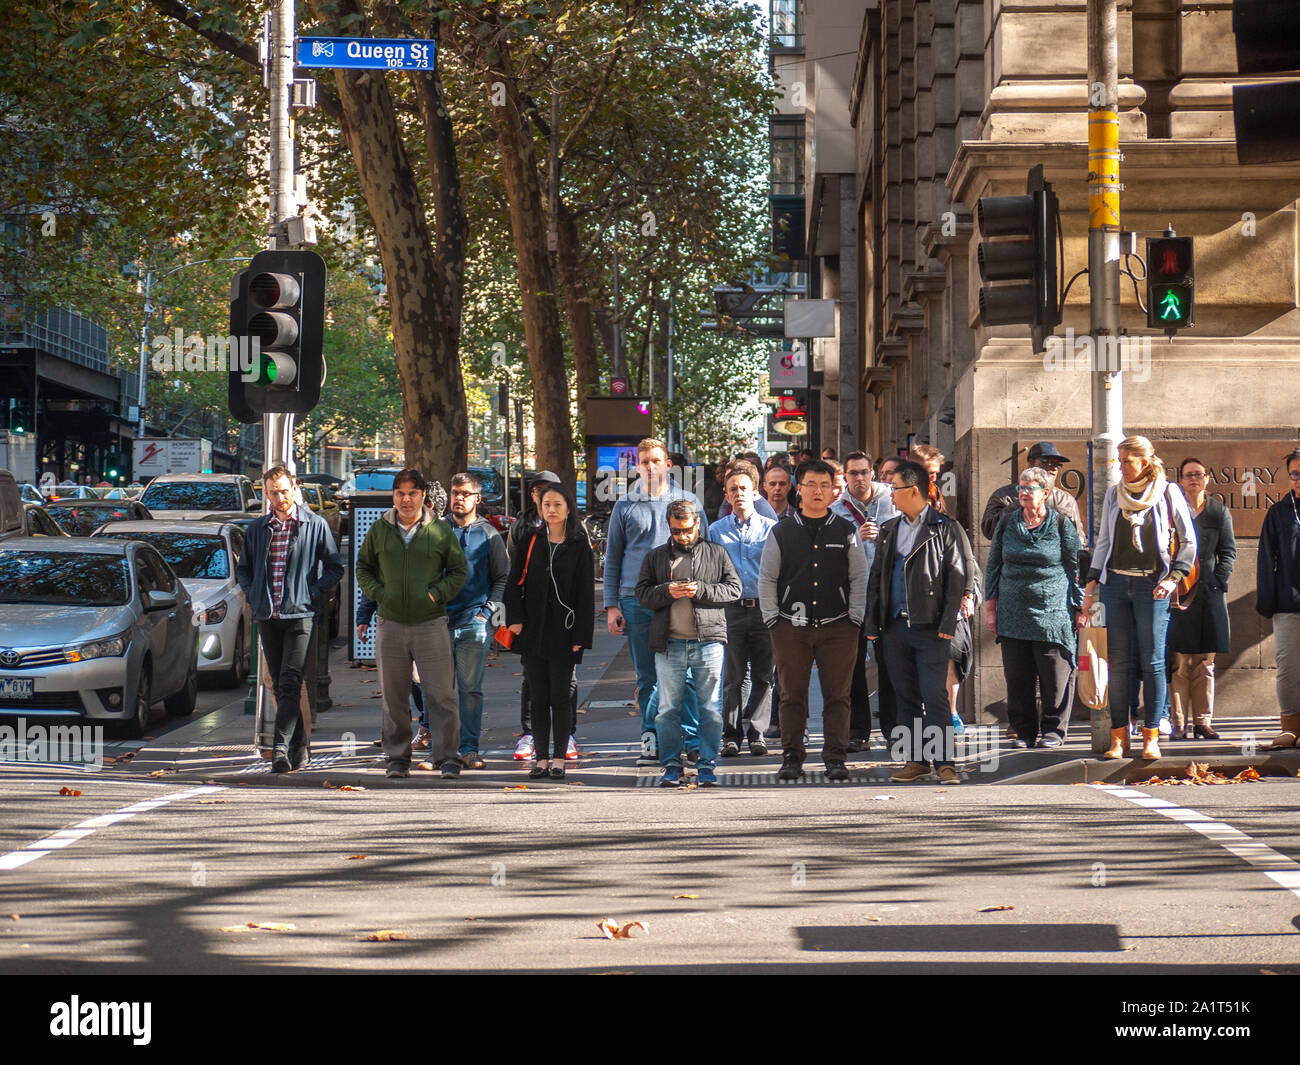 Crowds of pedestrians waiting at the traffic light to cross in CBD. Melbourne, VIC Australia. Stock Photo